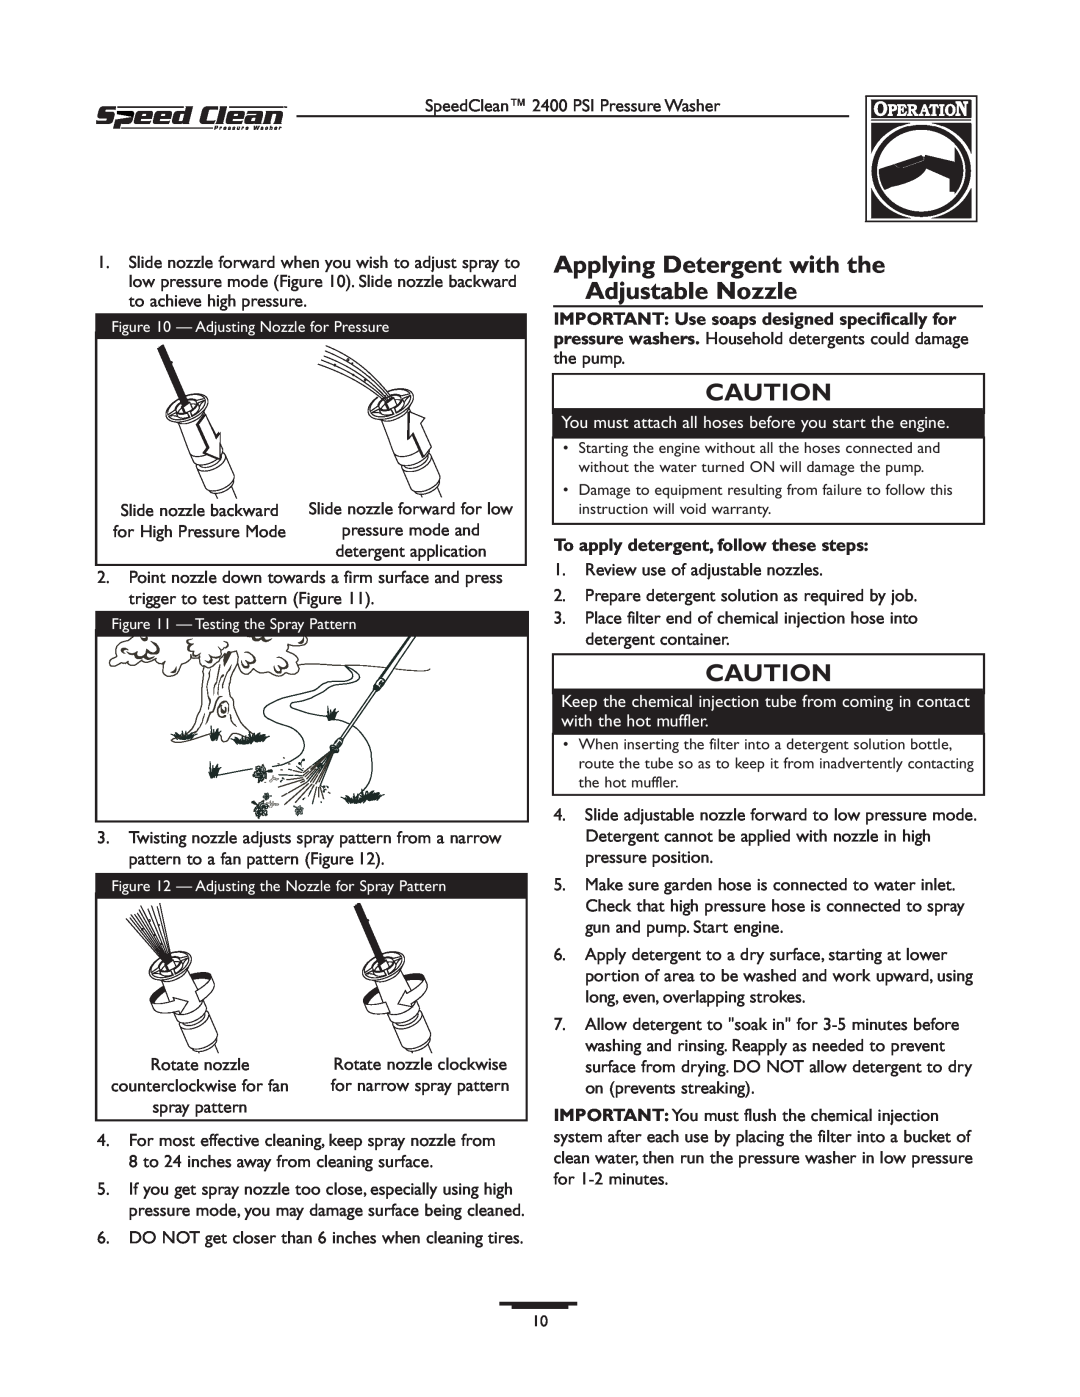 Briggs & Stratton 020227-0 Applying Detergent with the Adjustable Nozzle, To apply detergent, follow these steps 